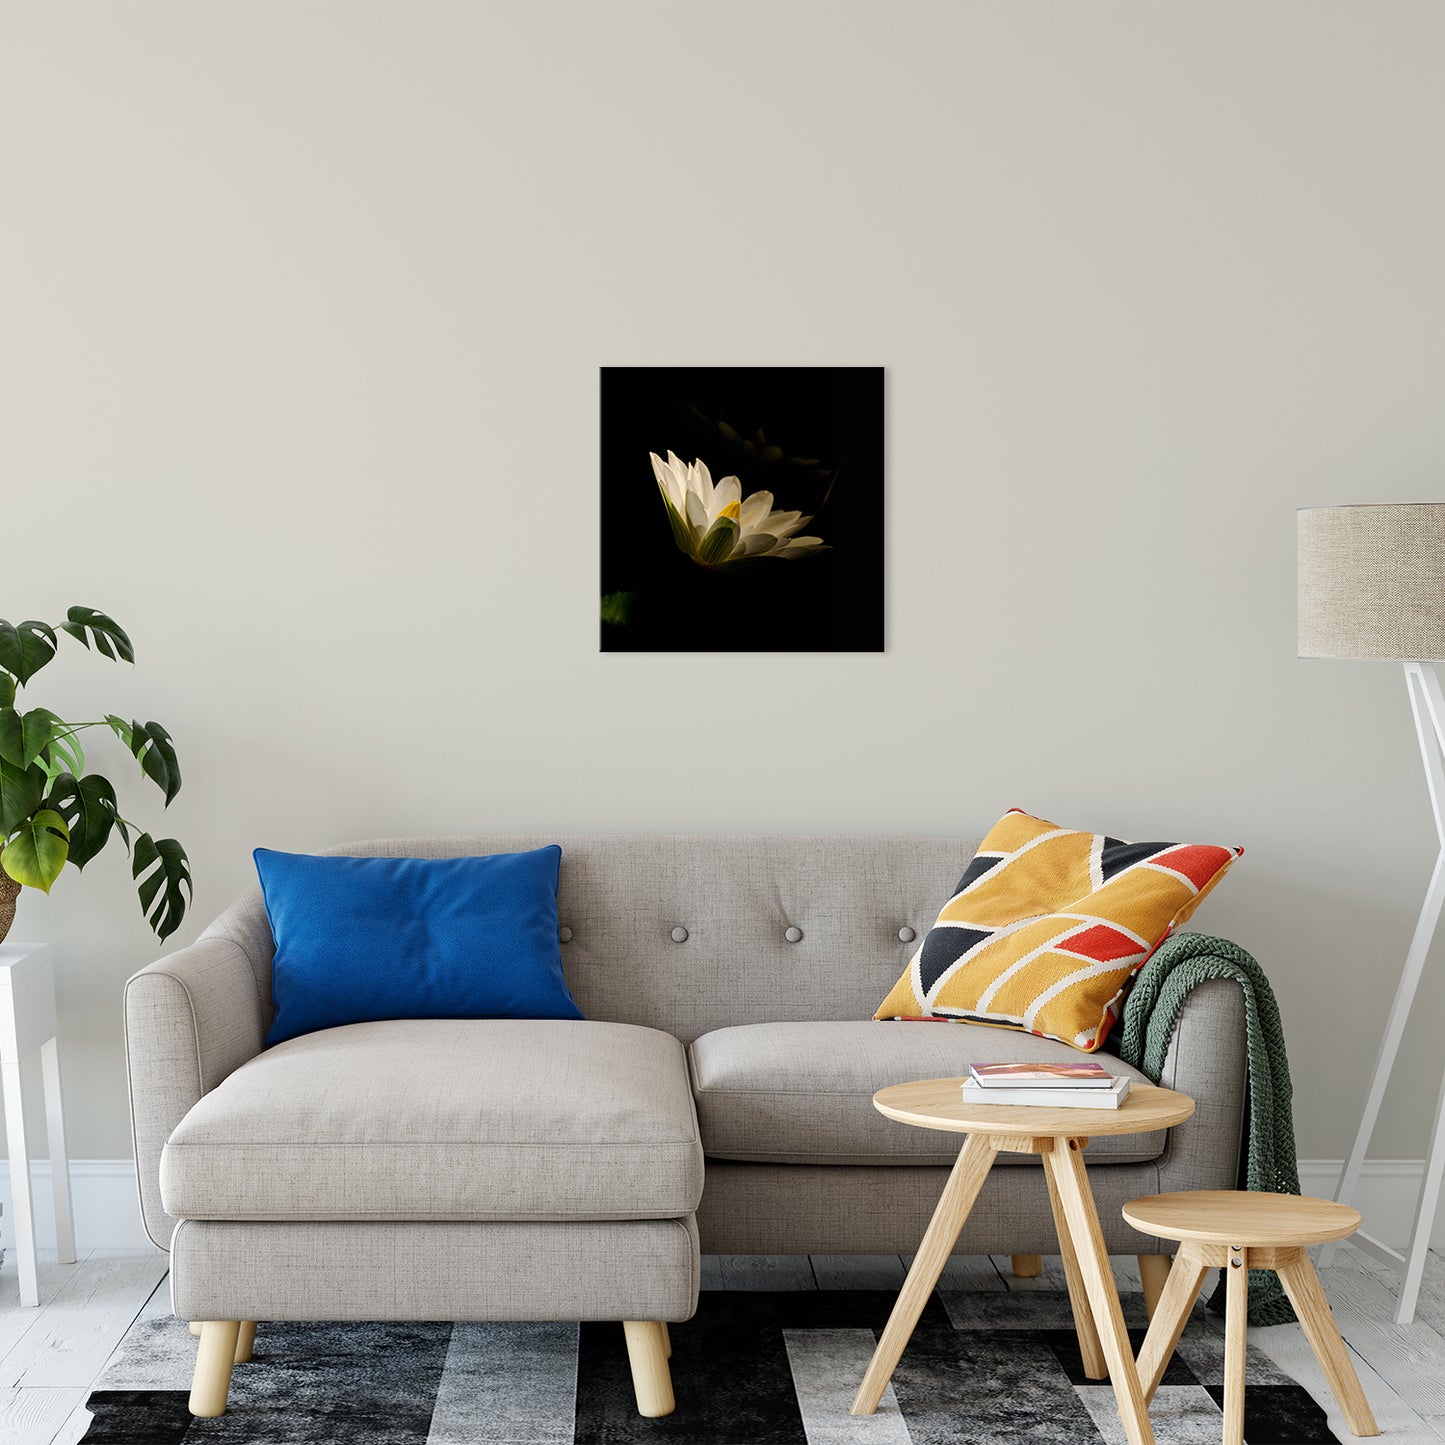 Spotlight on Waterlily - Square Nature / Floral Photo Fine Art & Unframed Wall Art Prints 16" x 16" / Fine Art Canvas - PIPAFINEART